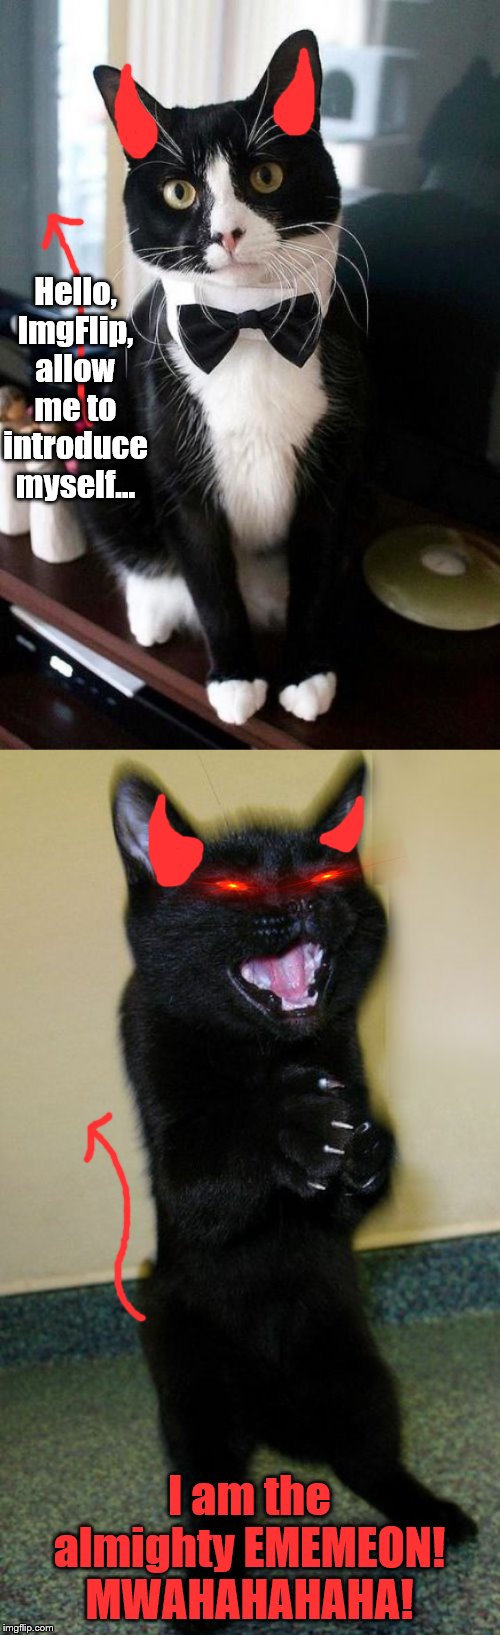 Hello, ImgFlip, allow me to introduce myself... I am the almighty EMEMEON! MWAHAHAHAHA! | image tagged in evil cat | made w/ Imgflip meme maker